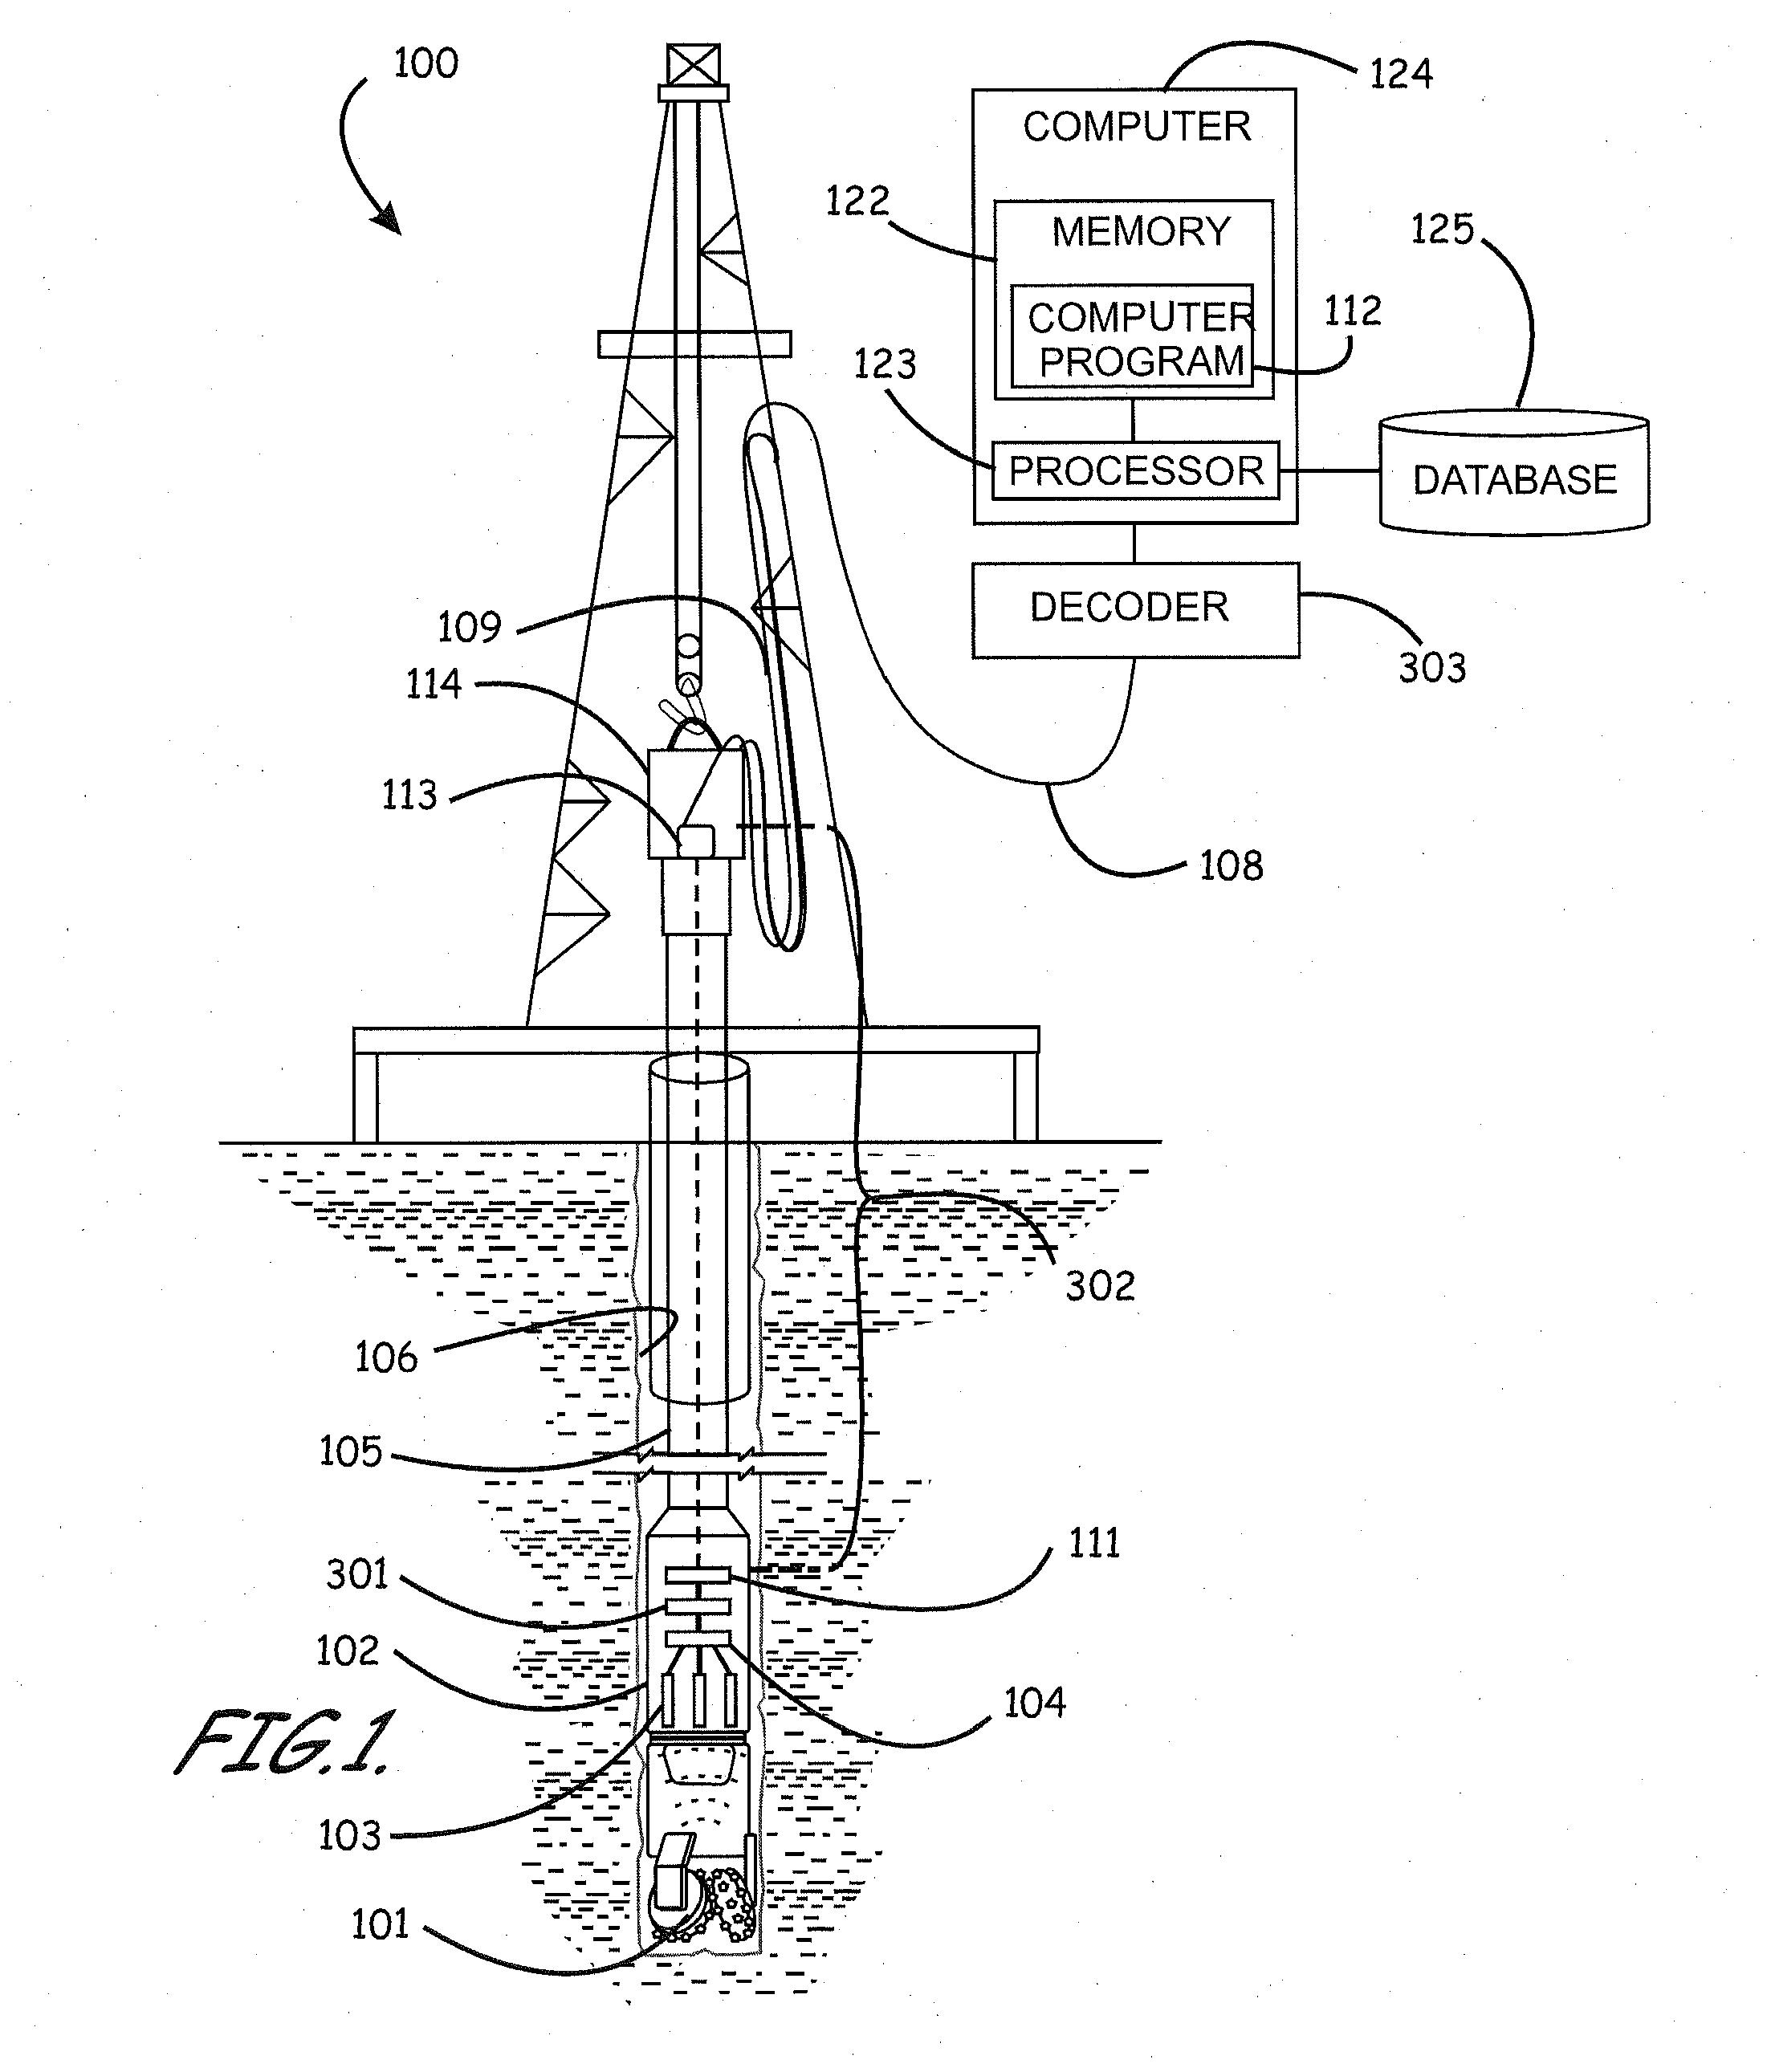 Apparatus, computer readable medium, and program code for evaluating rock properties while drilling using downhole acoustic sensors and telemetry system